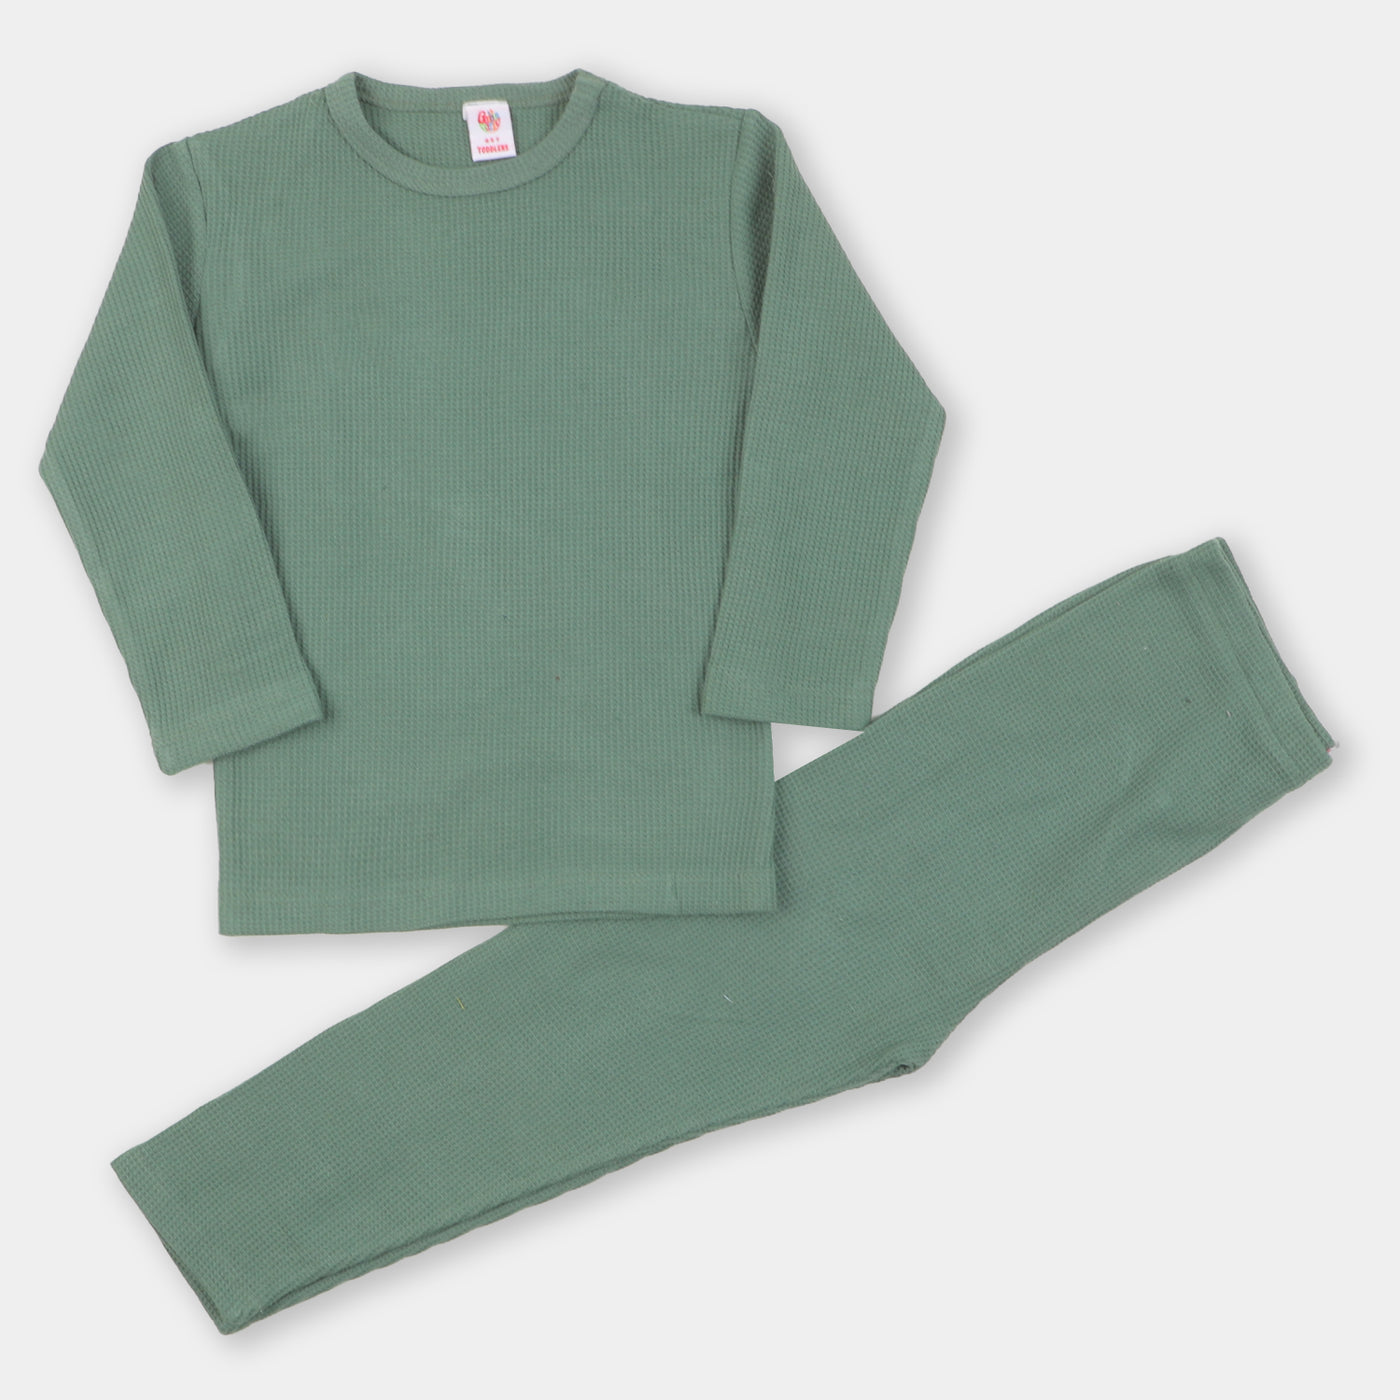 Unisex Thermal Suit - Green